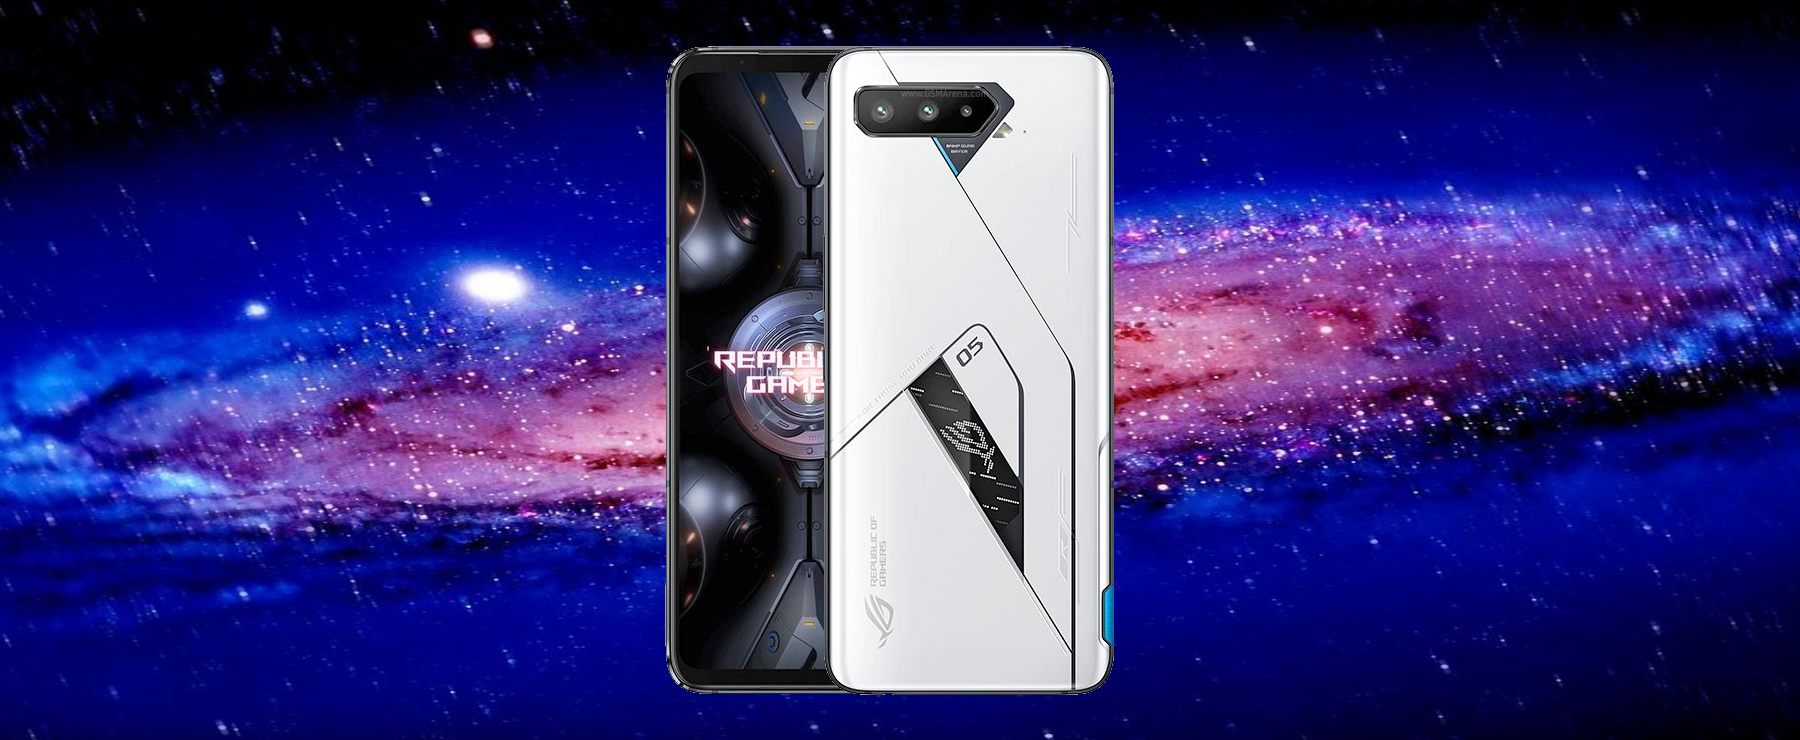 An image of the new ASUS ROG 5 gaming phone on a galaxy background